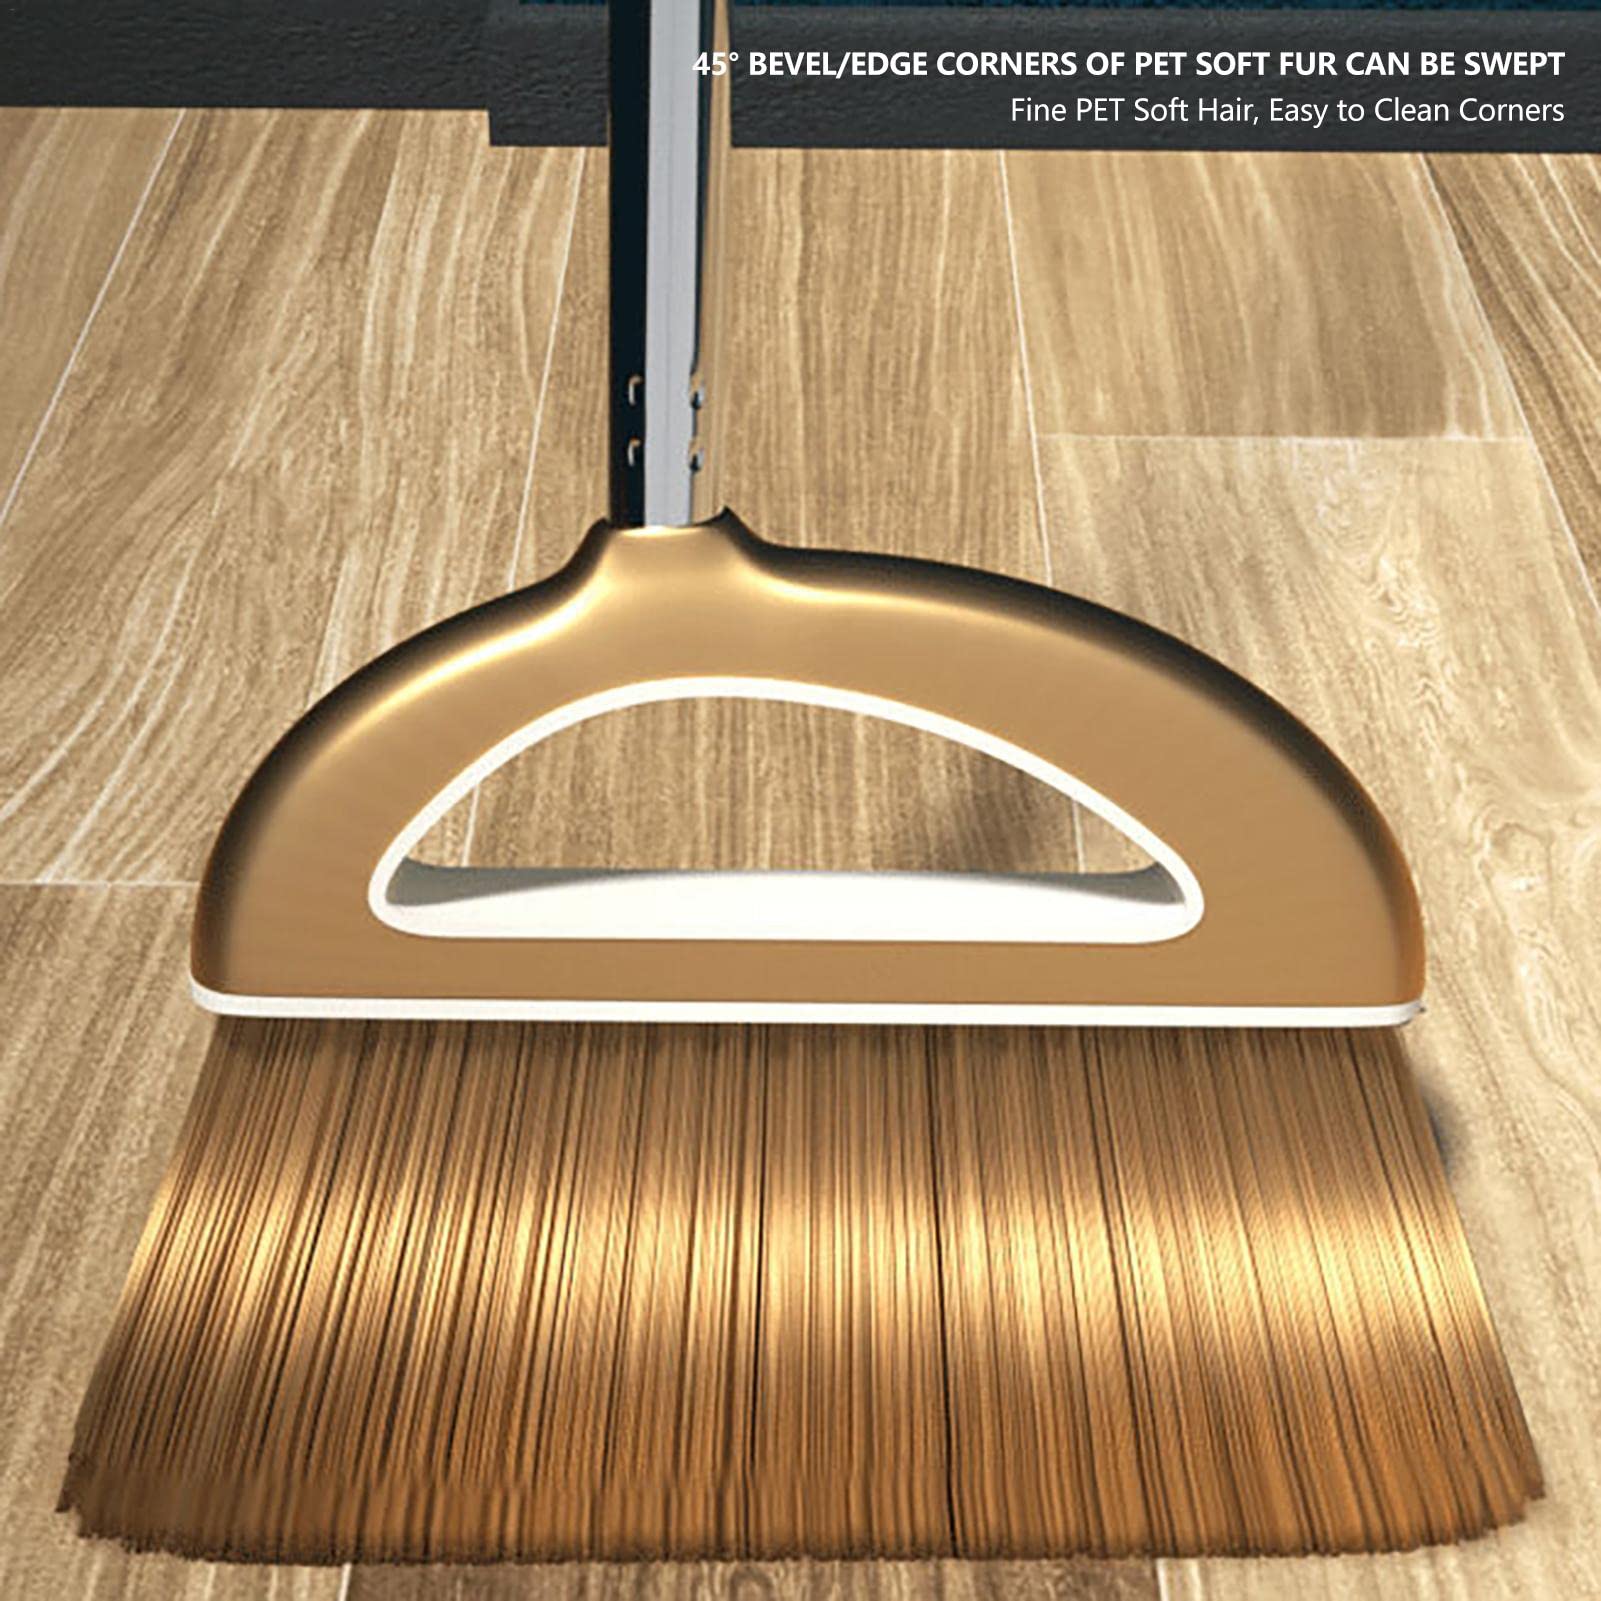 Broom And Dustpan For Home,Upgrade Long Handle Broom With Stand Up Dustpan Combo Set,Broom And Dustpan Set,Long Handle Dust Pan And Broom Heavy Duty Broom With Dustpan Combo Set For Home Kitchen